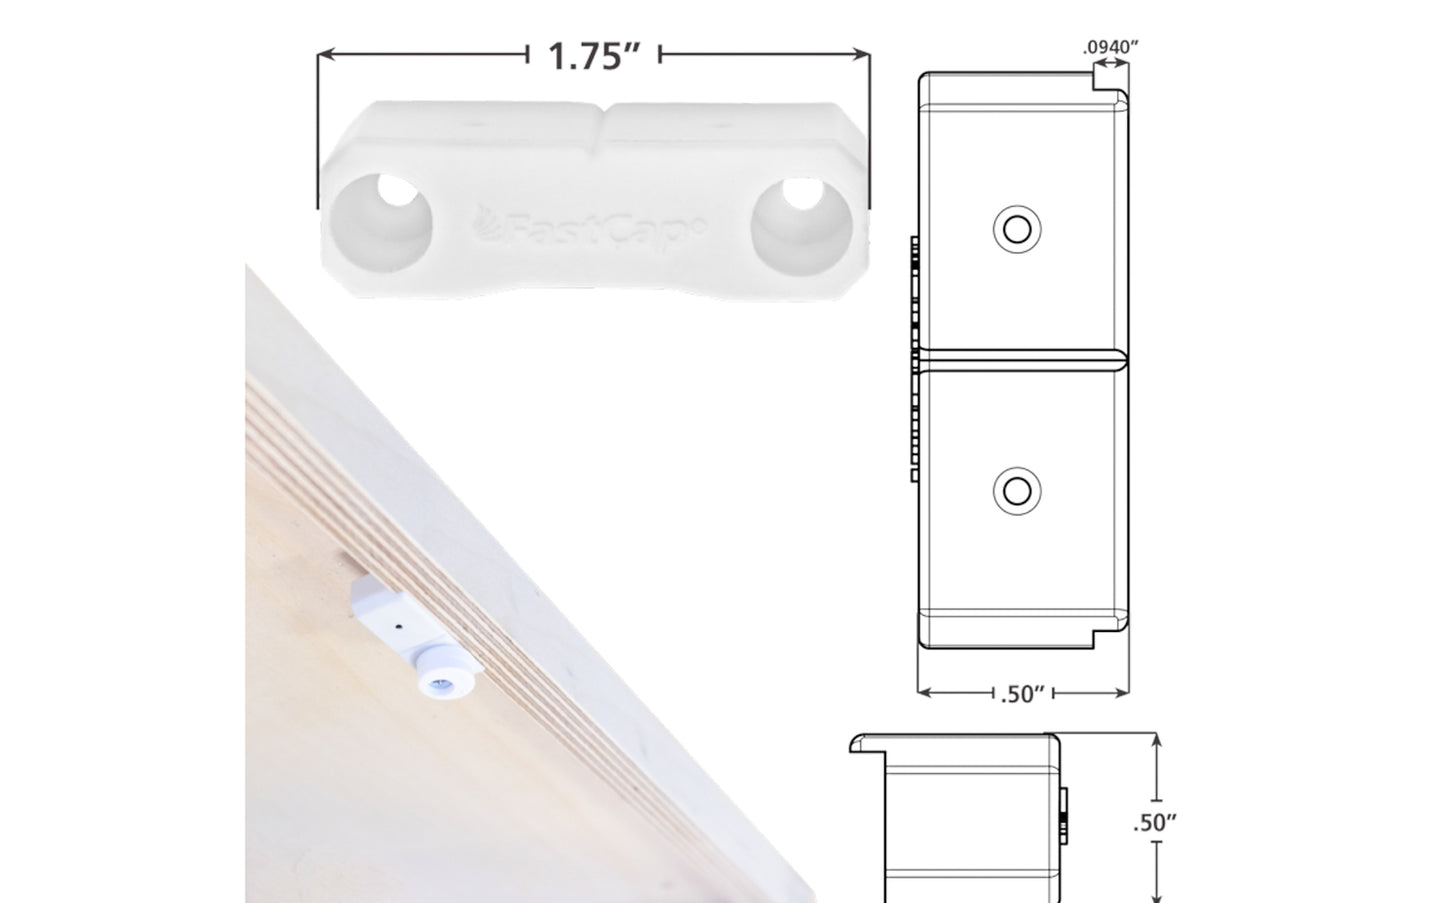 Euro Door Mount by FastCap is designed for face frame cabinets. Position the mount to the inside of the face frame with FastCap Kolbe Korner screws. Simply use the holes to align our Standard Euro Door Stop & screw into place. Can be used for single-door or double door cabinets